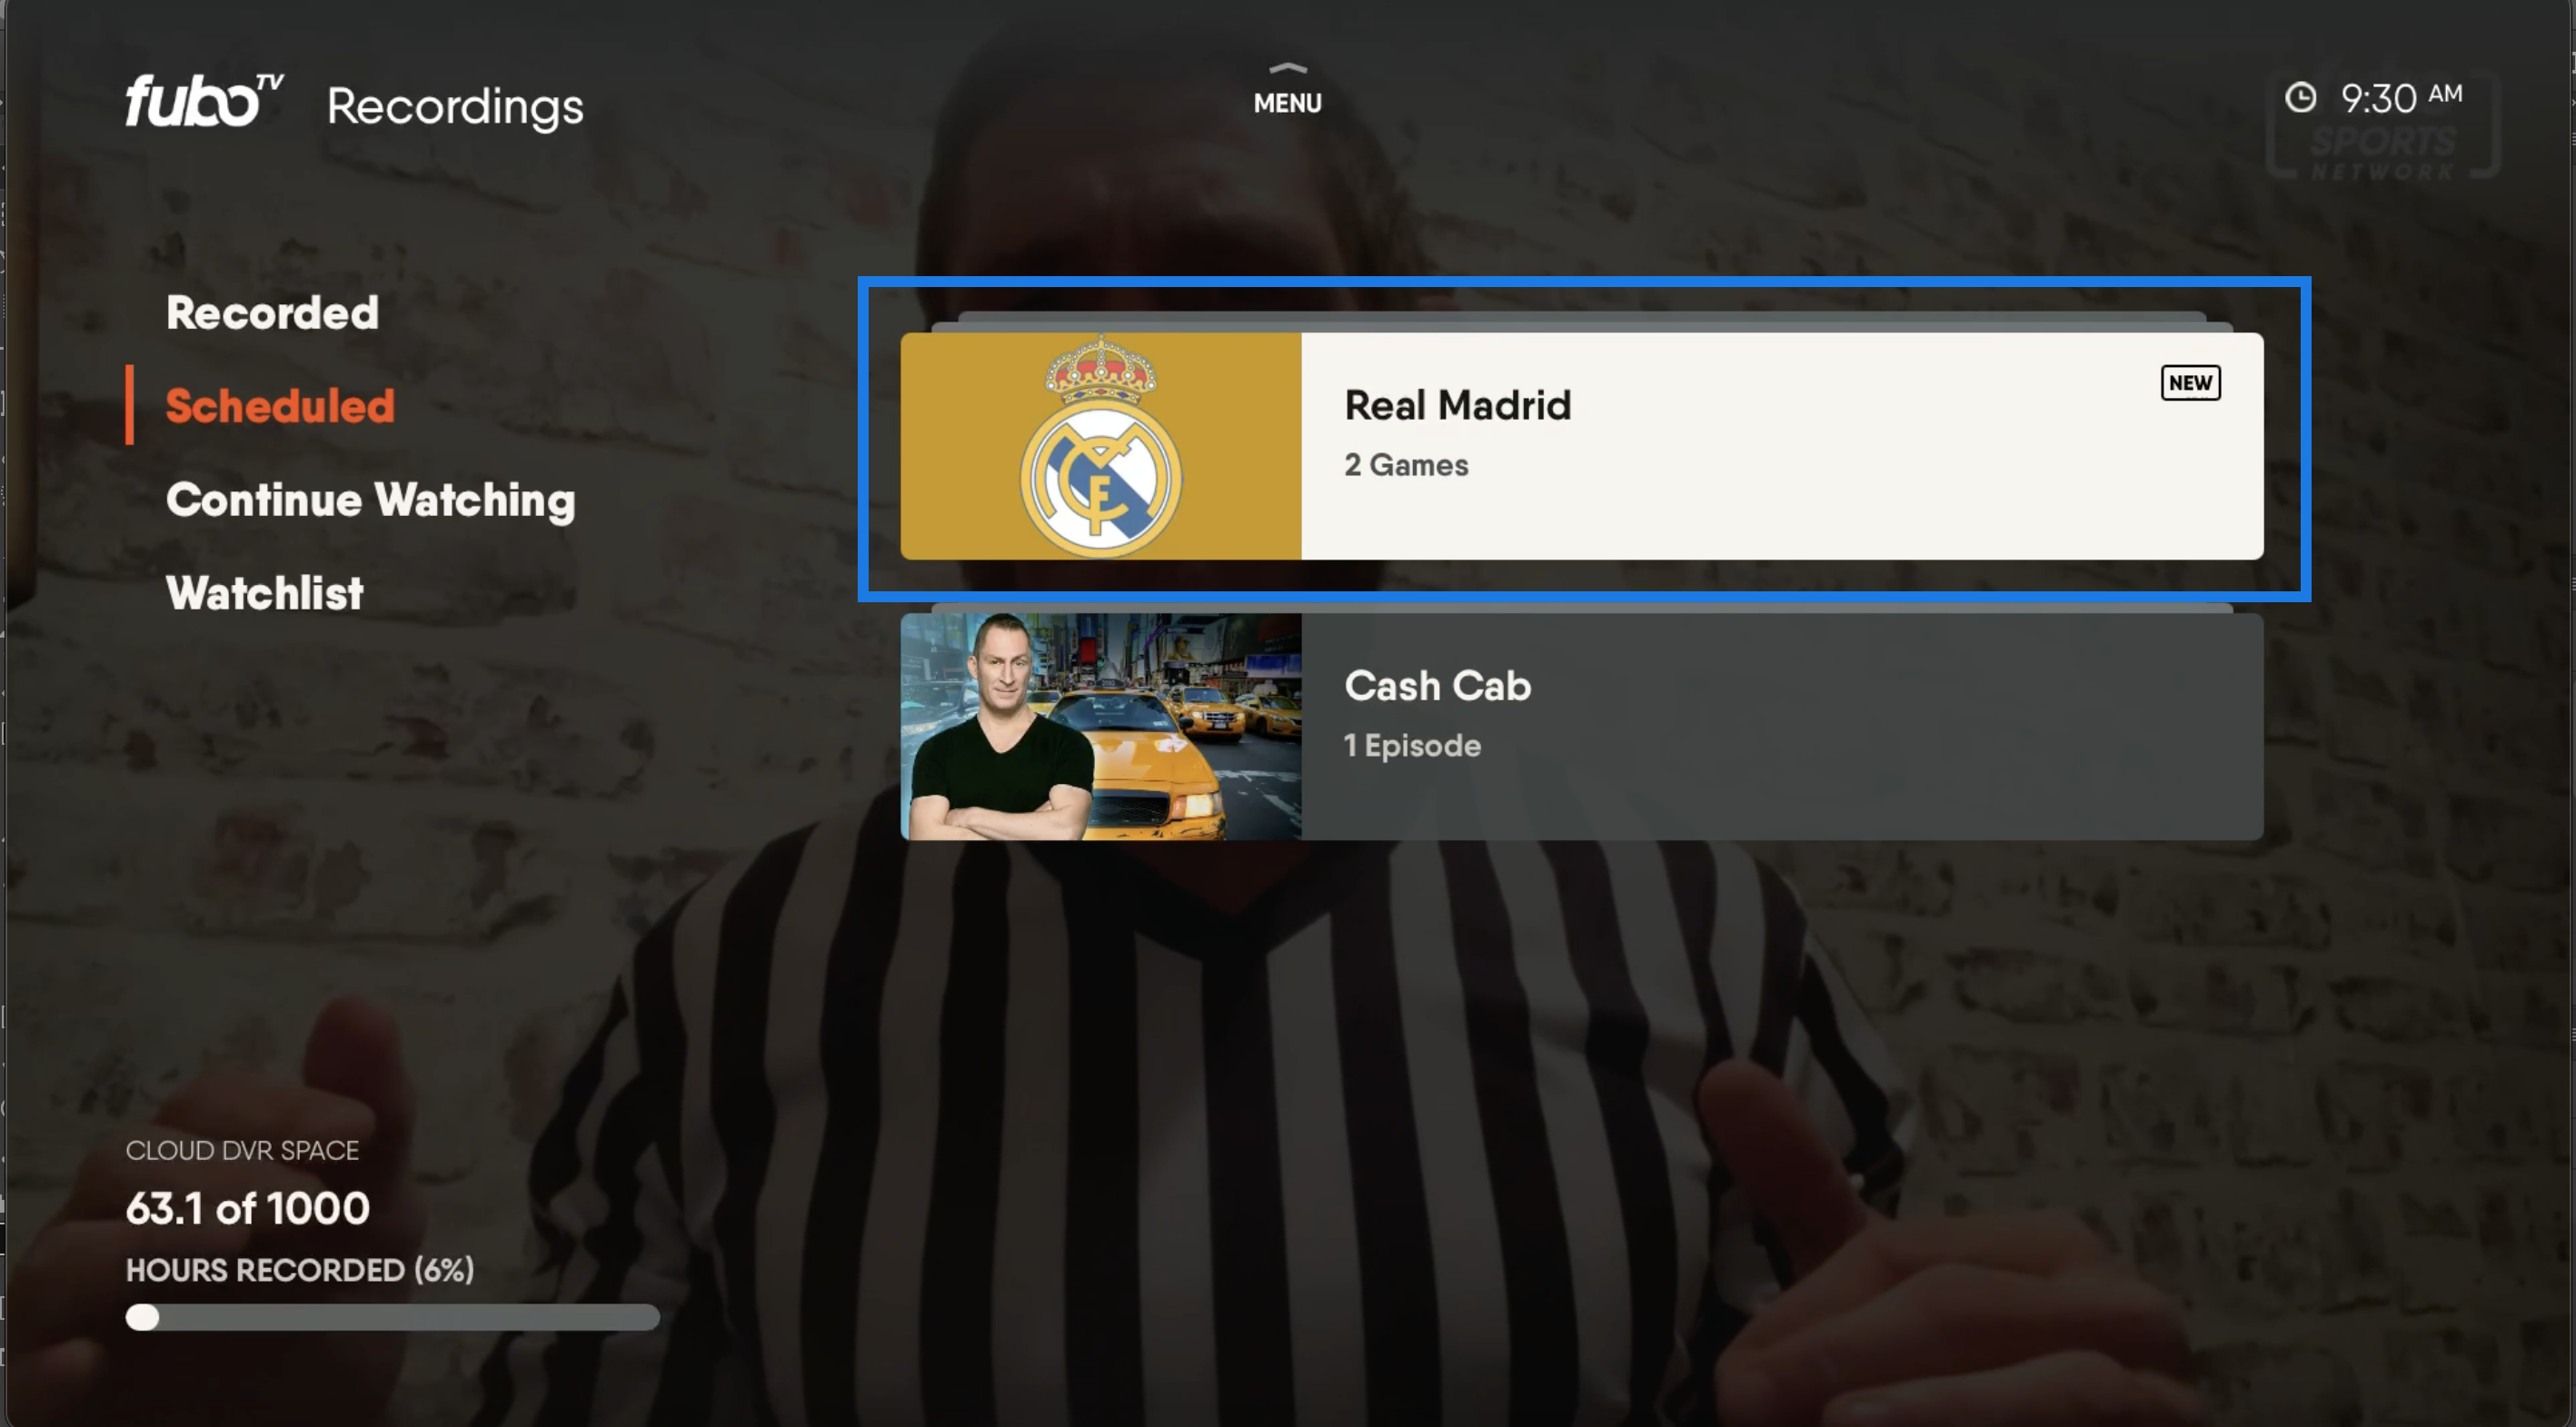 SCHEDULED recordings on the MY STUFF page for the FuboTV app on Apple TV with the folder for upcoming Real Madrid recordings highlighted